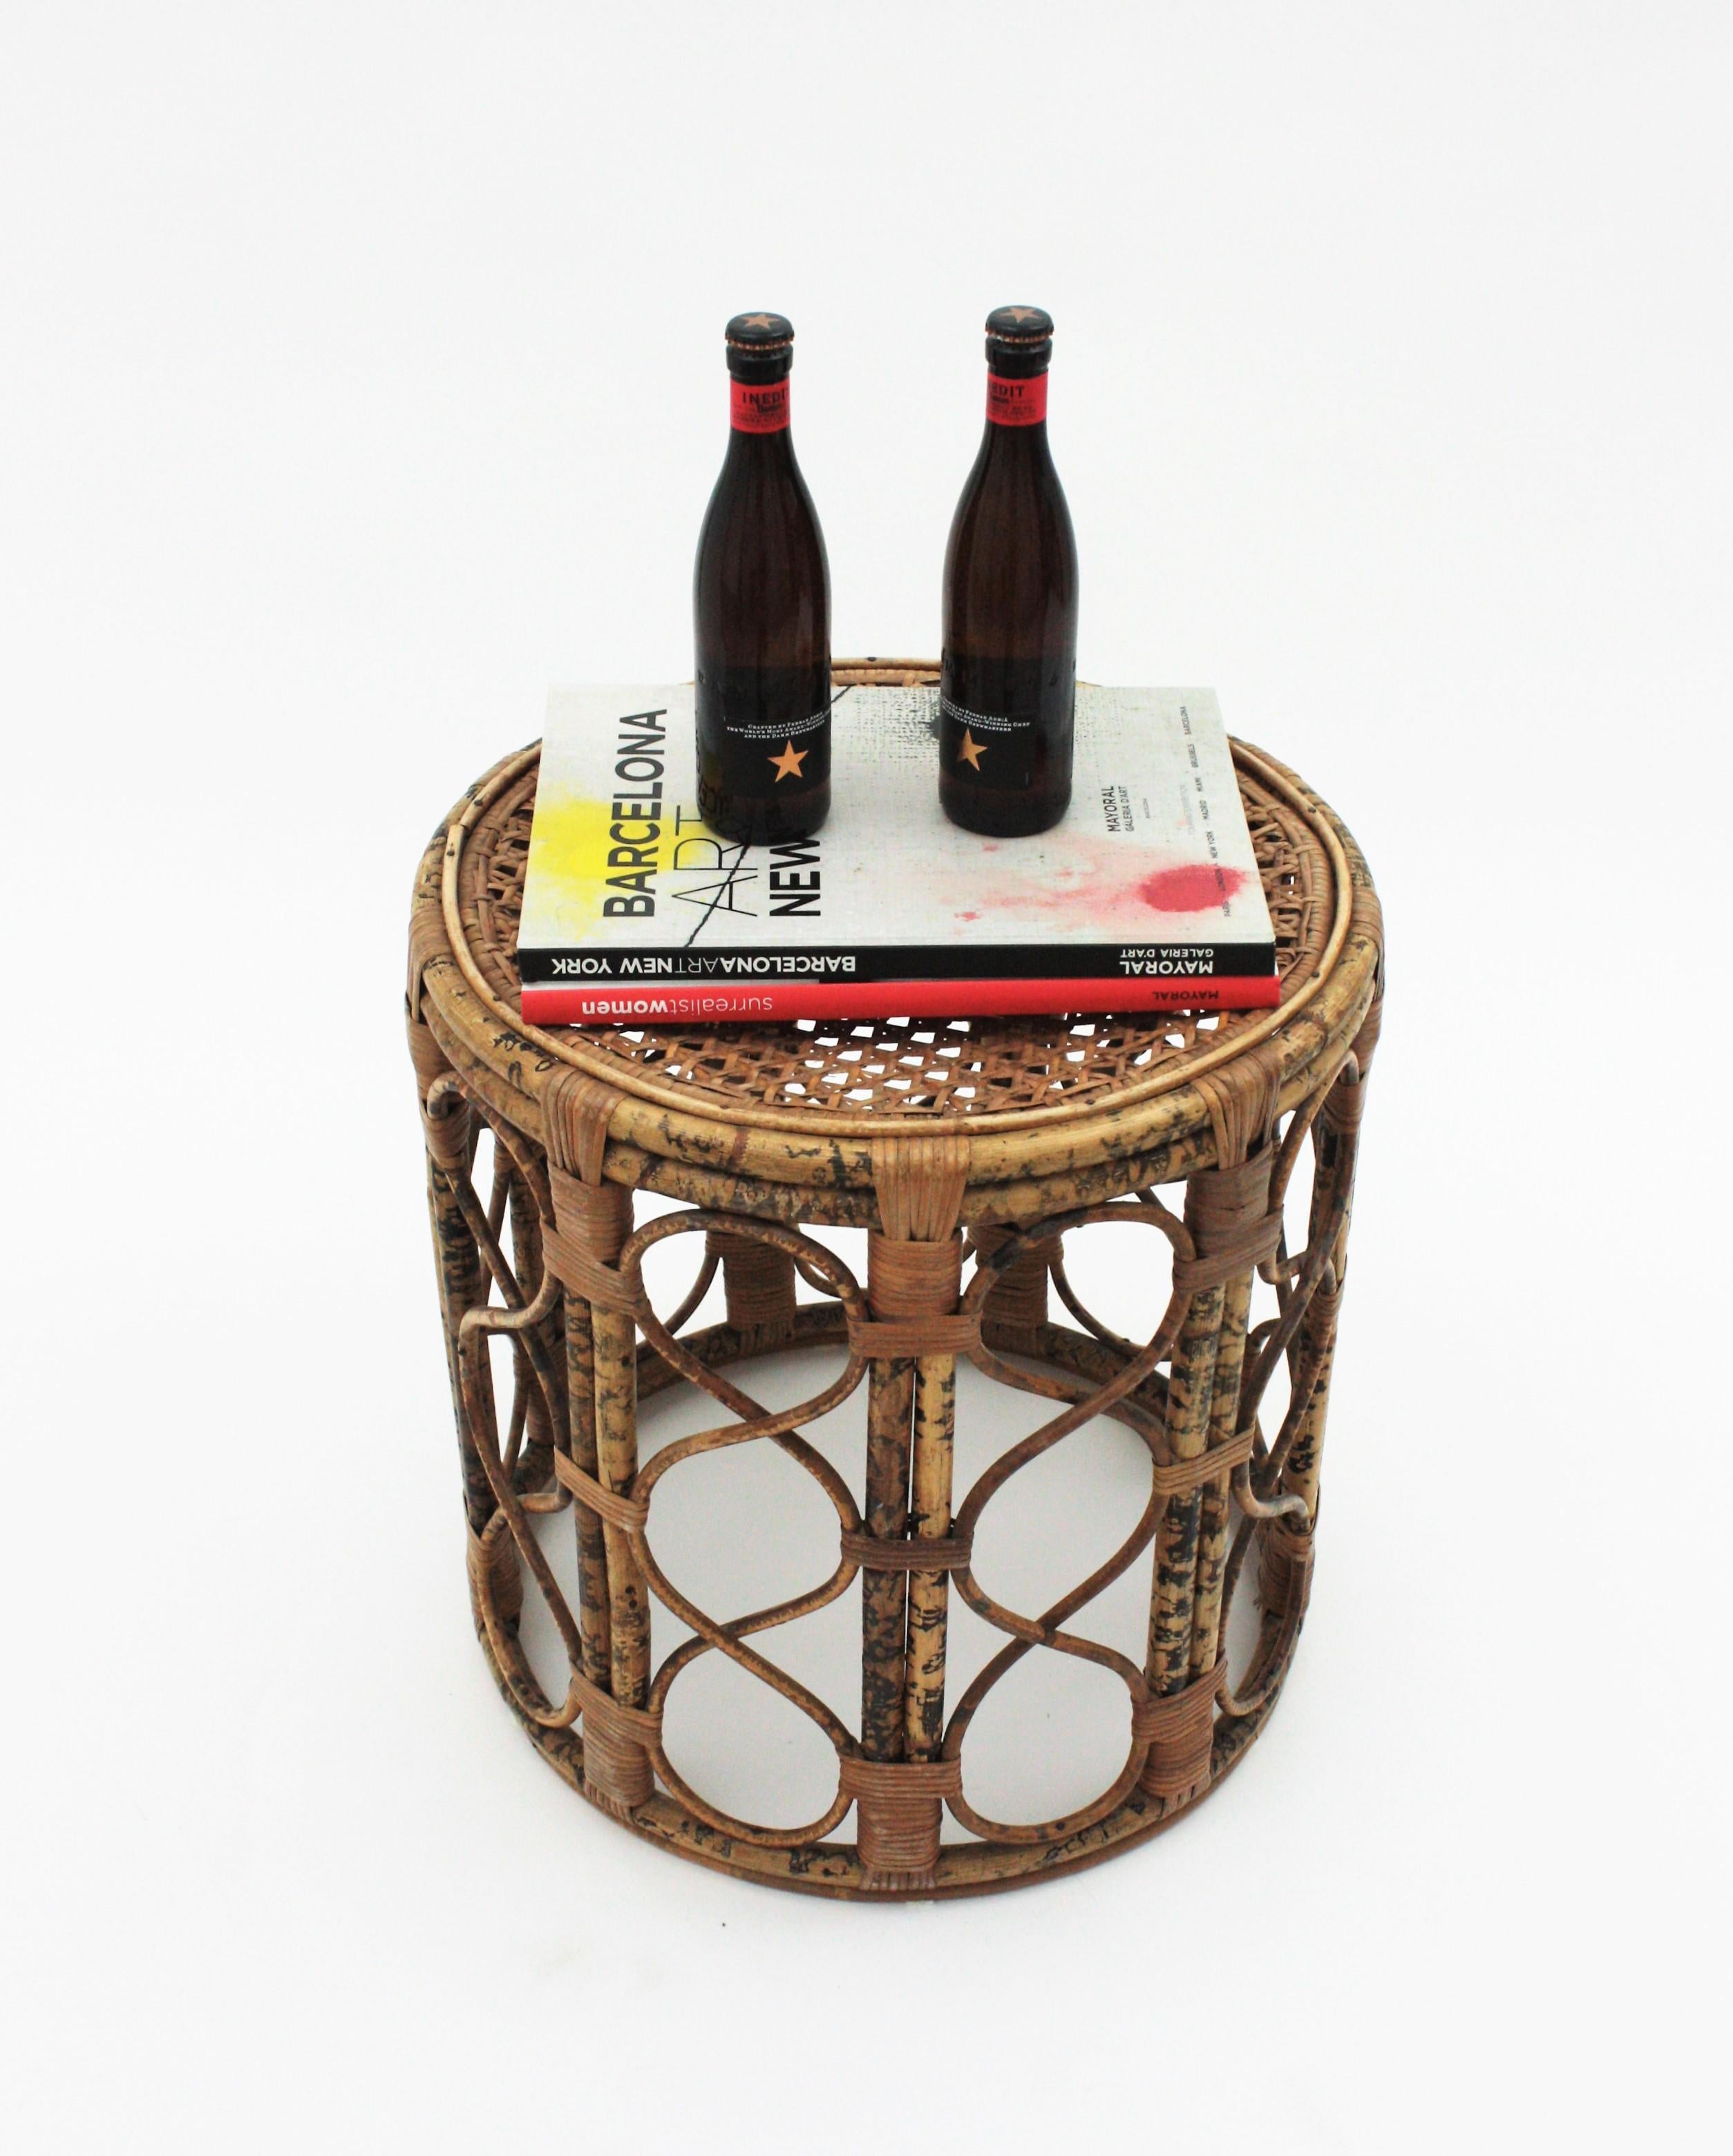 French Side Table or Stool in Tiger Bamboo Rattan with Woven Wicker Top, 1940s For Sale 2